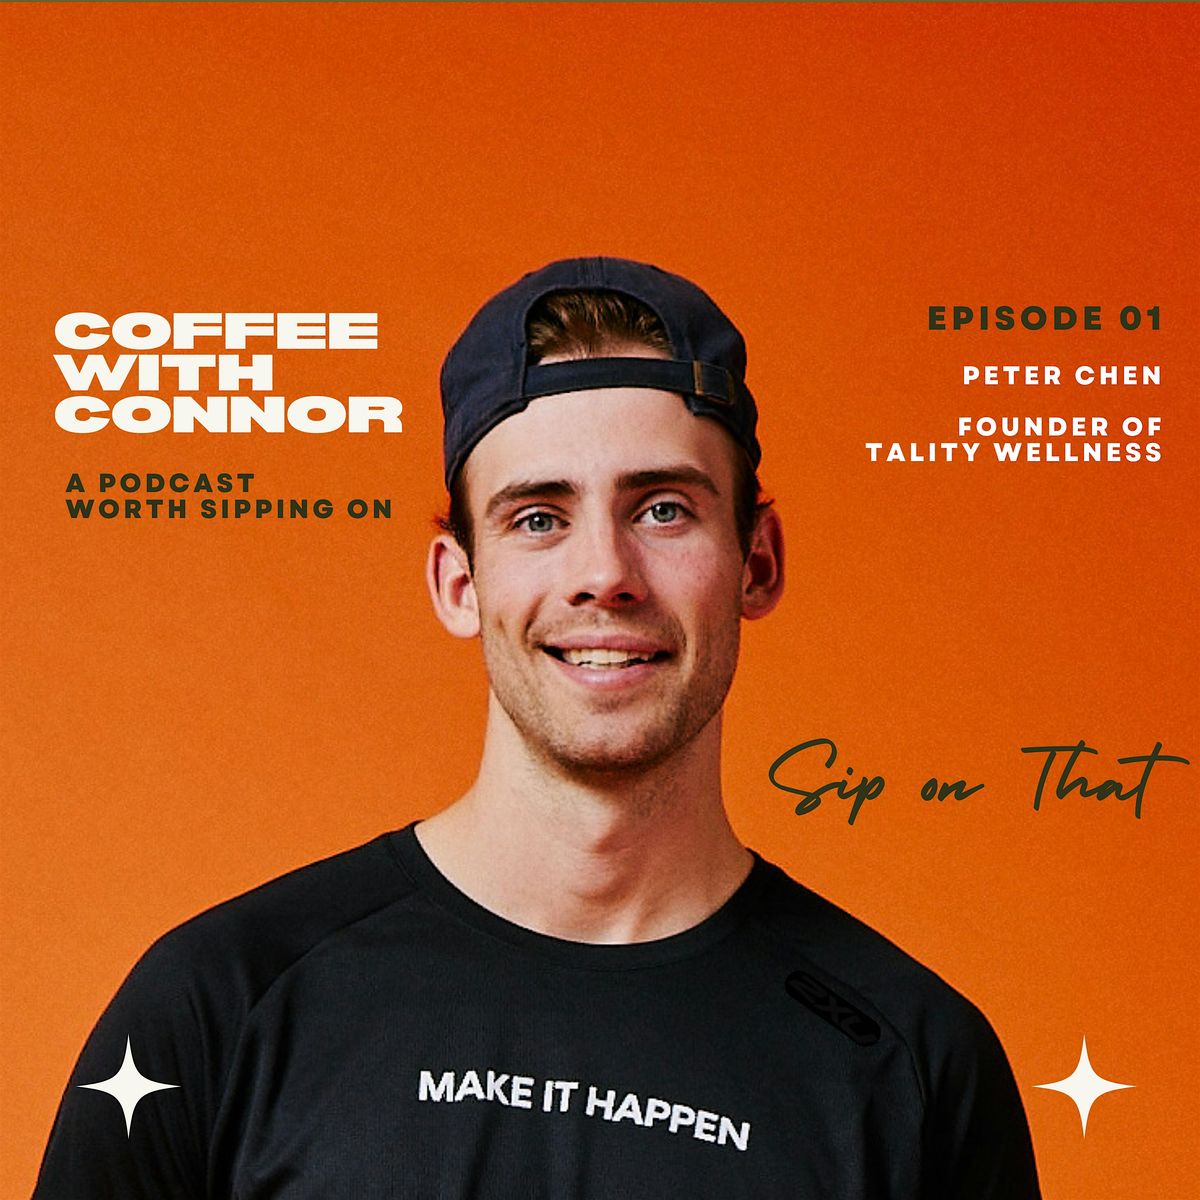 Coffee with Connor | Live Podcast with Peter Chen founder of Tality Wellnes